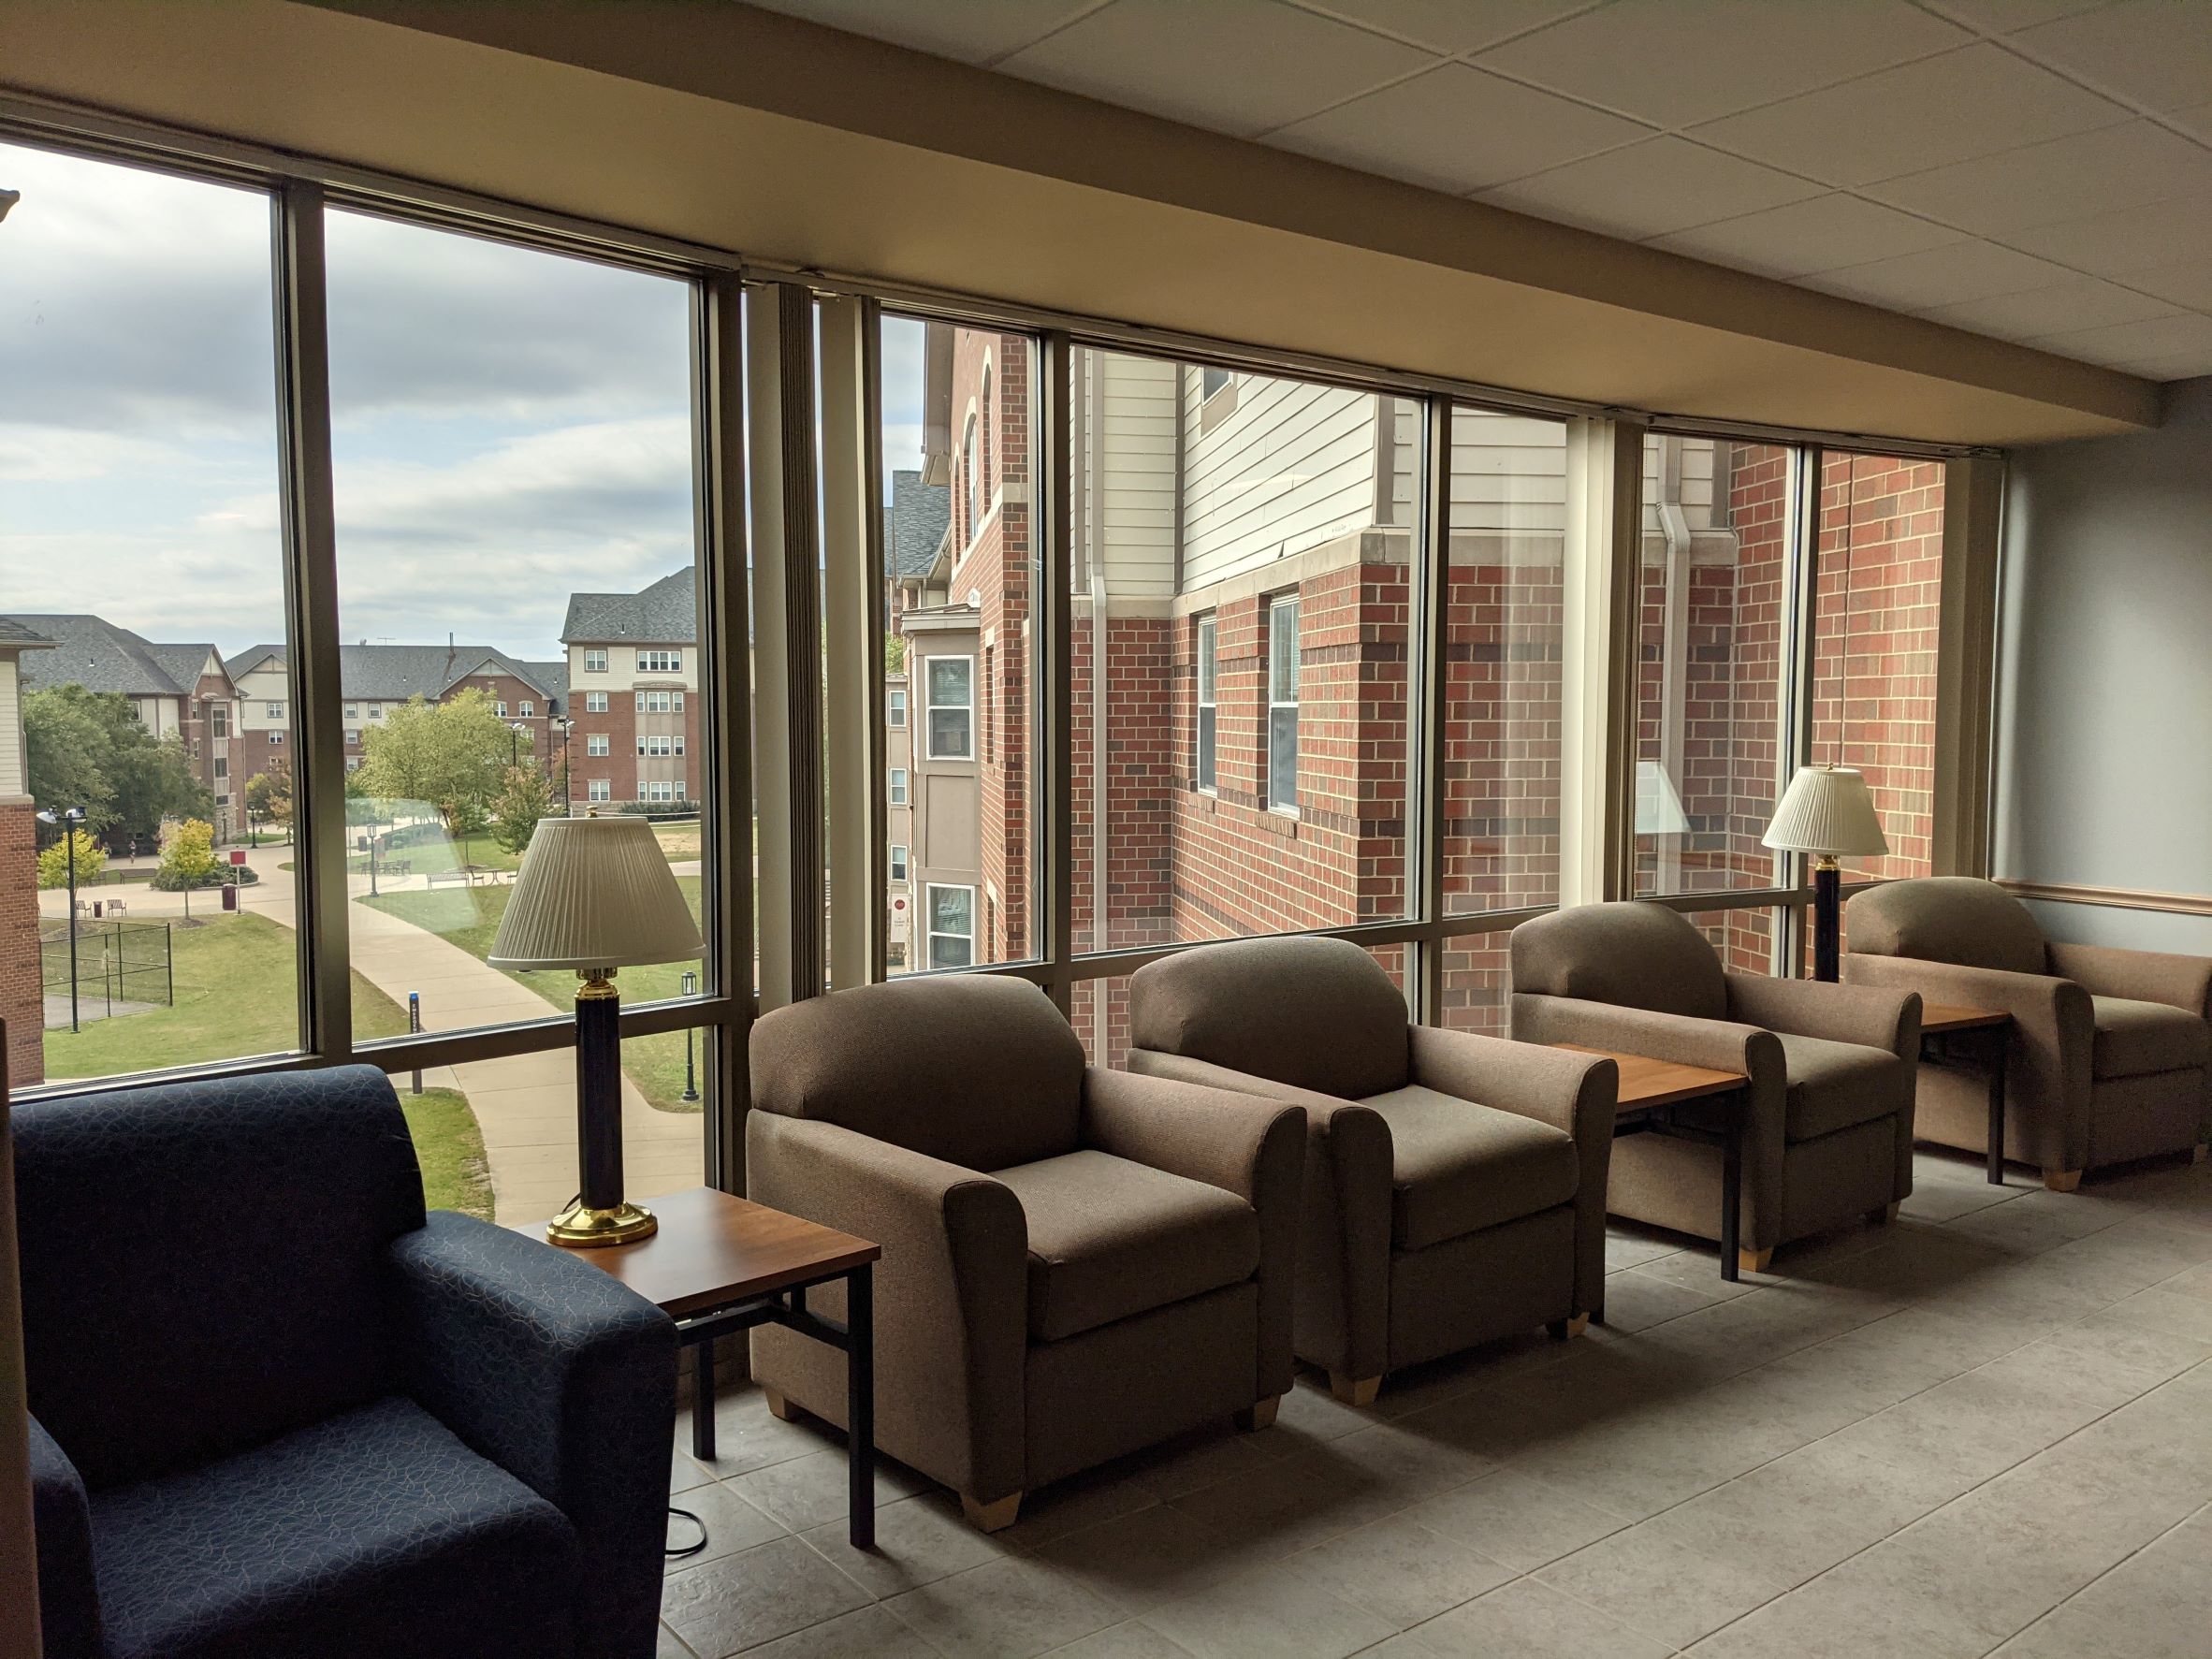 Image of a dormitory lounge with chairs along a large window space overlooking a campus courtyard with traditional red brick buildings in the background